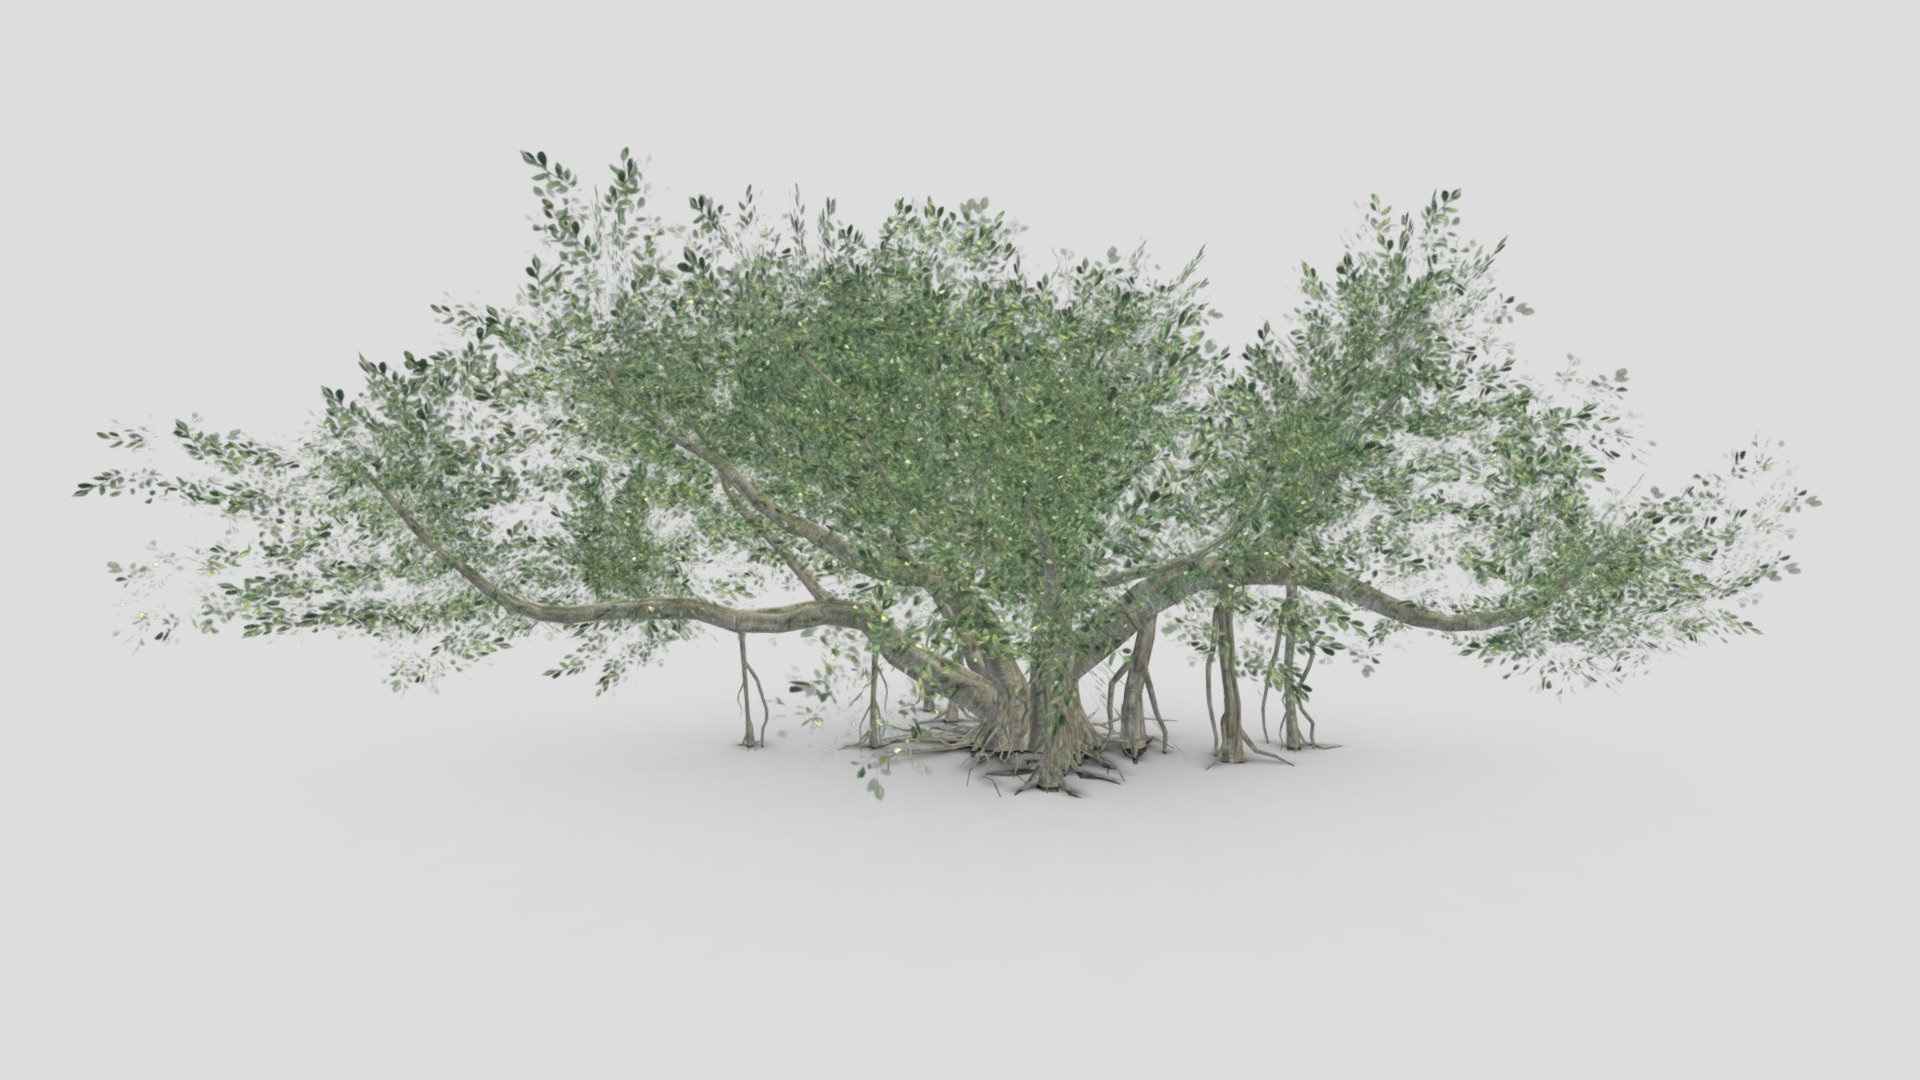 This is my concept of the Chinese Banyan Tree. This is a 3D low poly model of a Chinese Banyan Tree 3d model